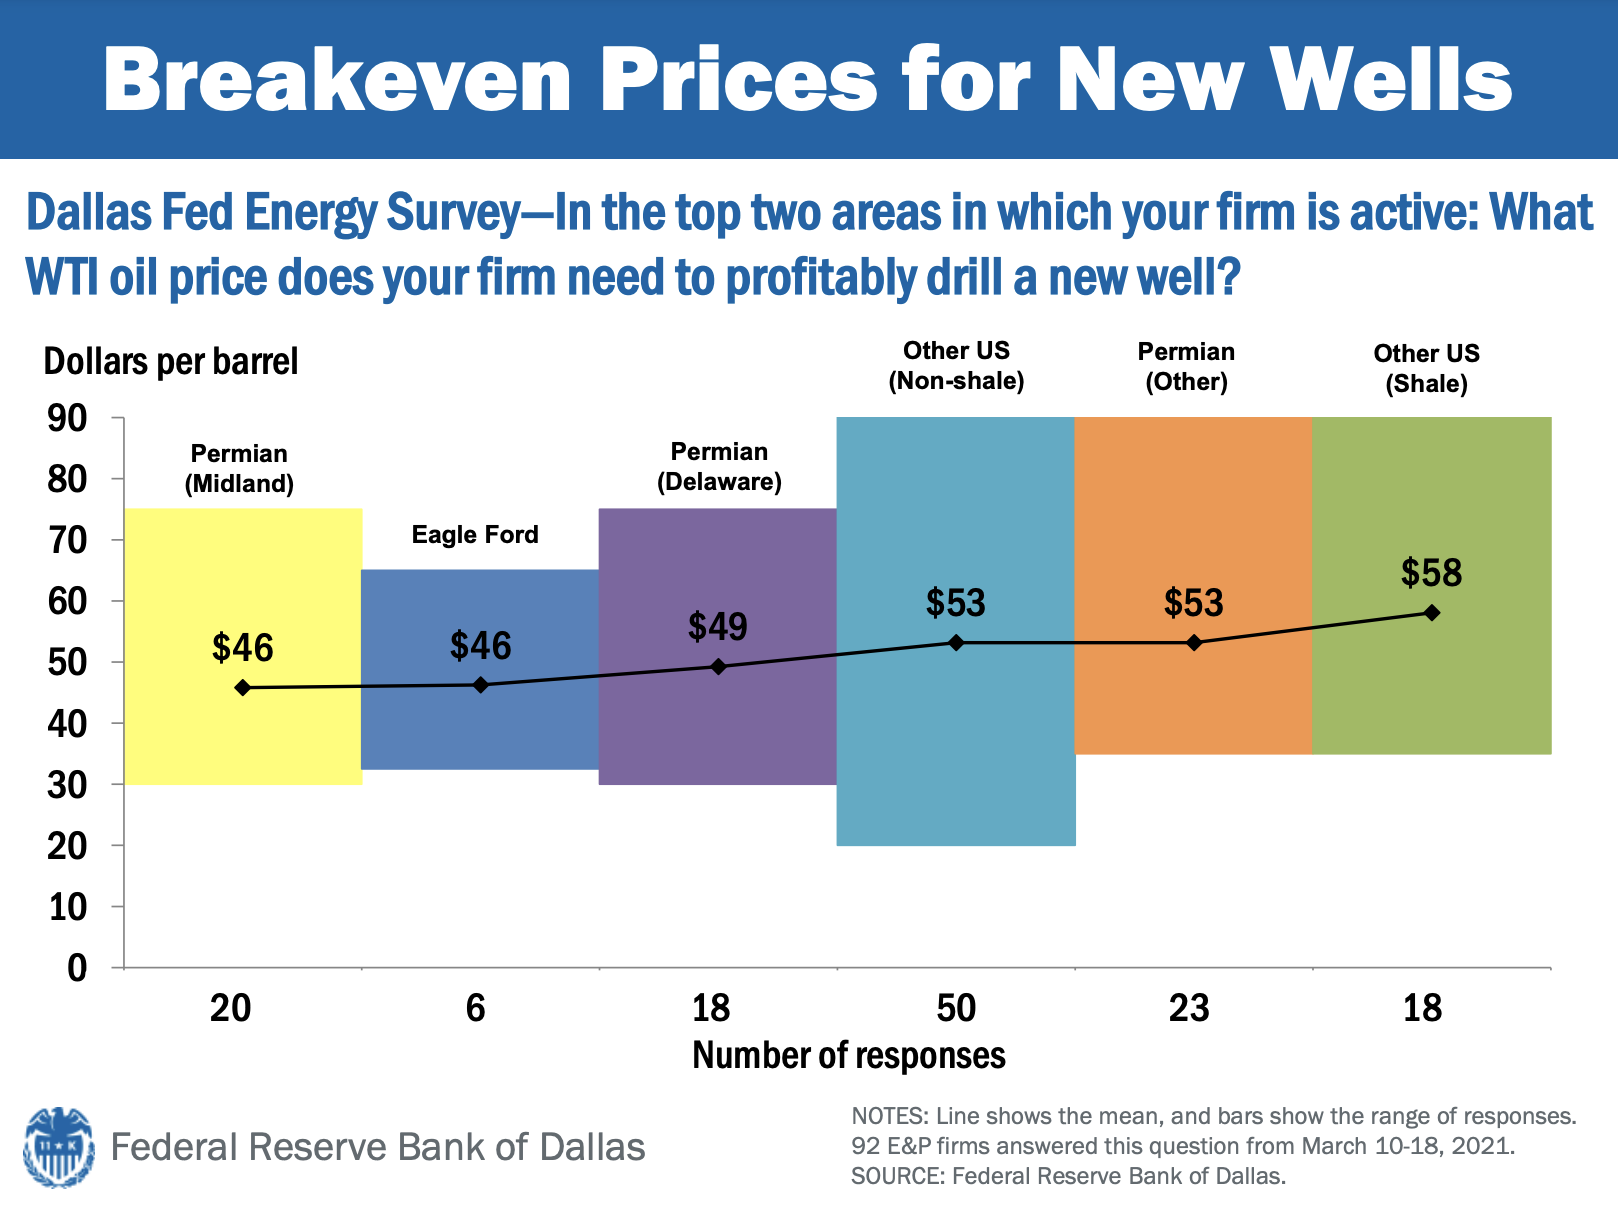 Figure 3: Breakeven Prices for New Wells